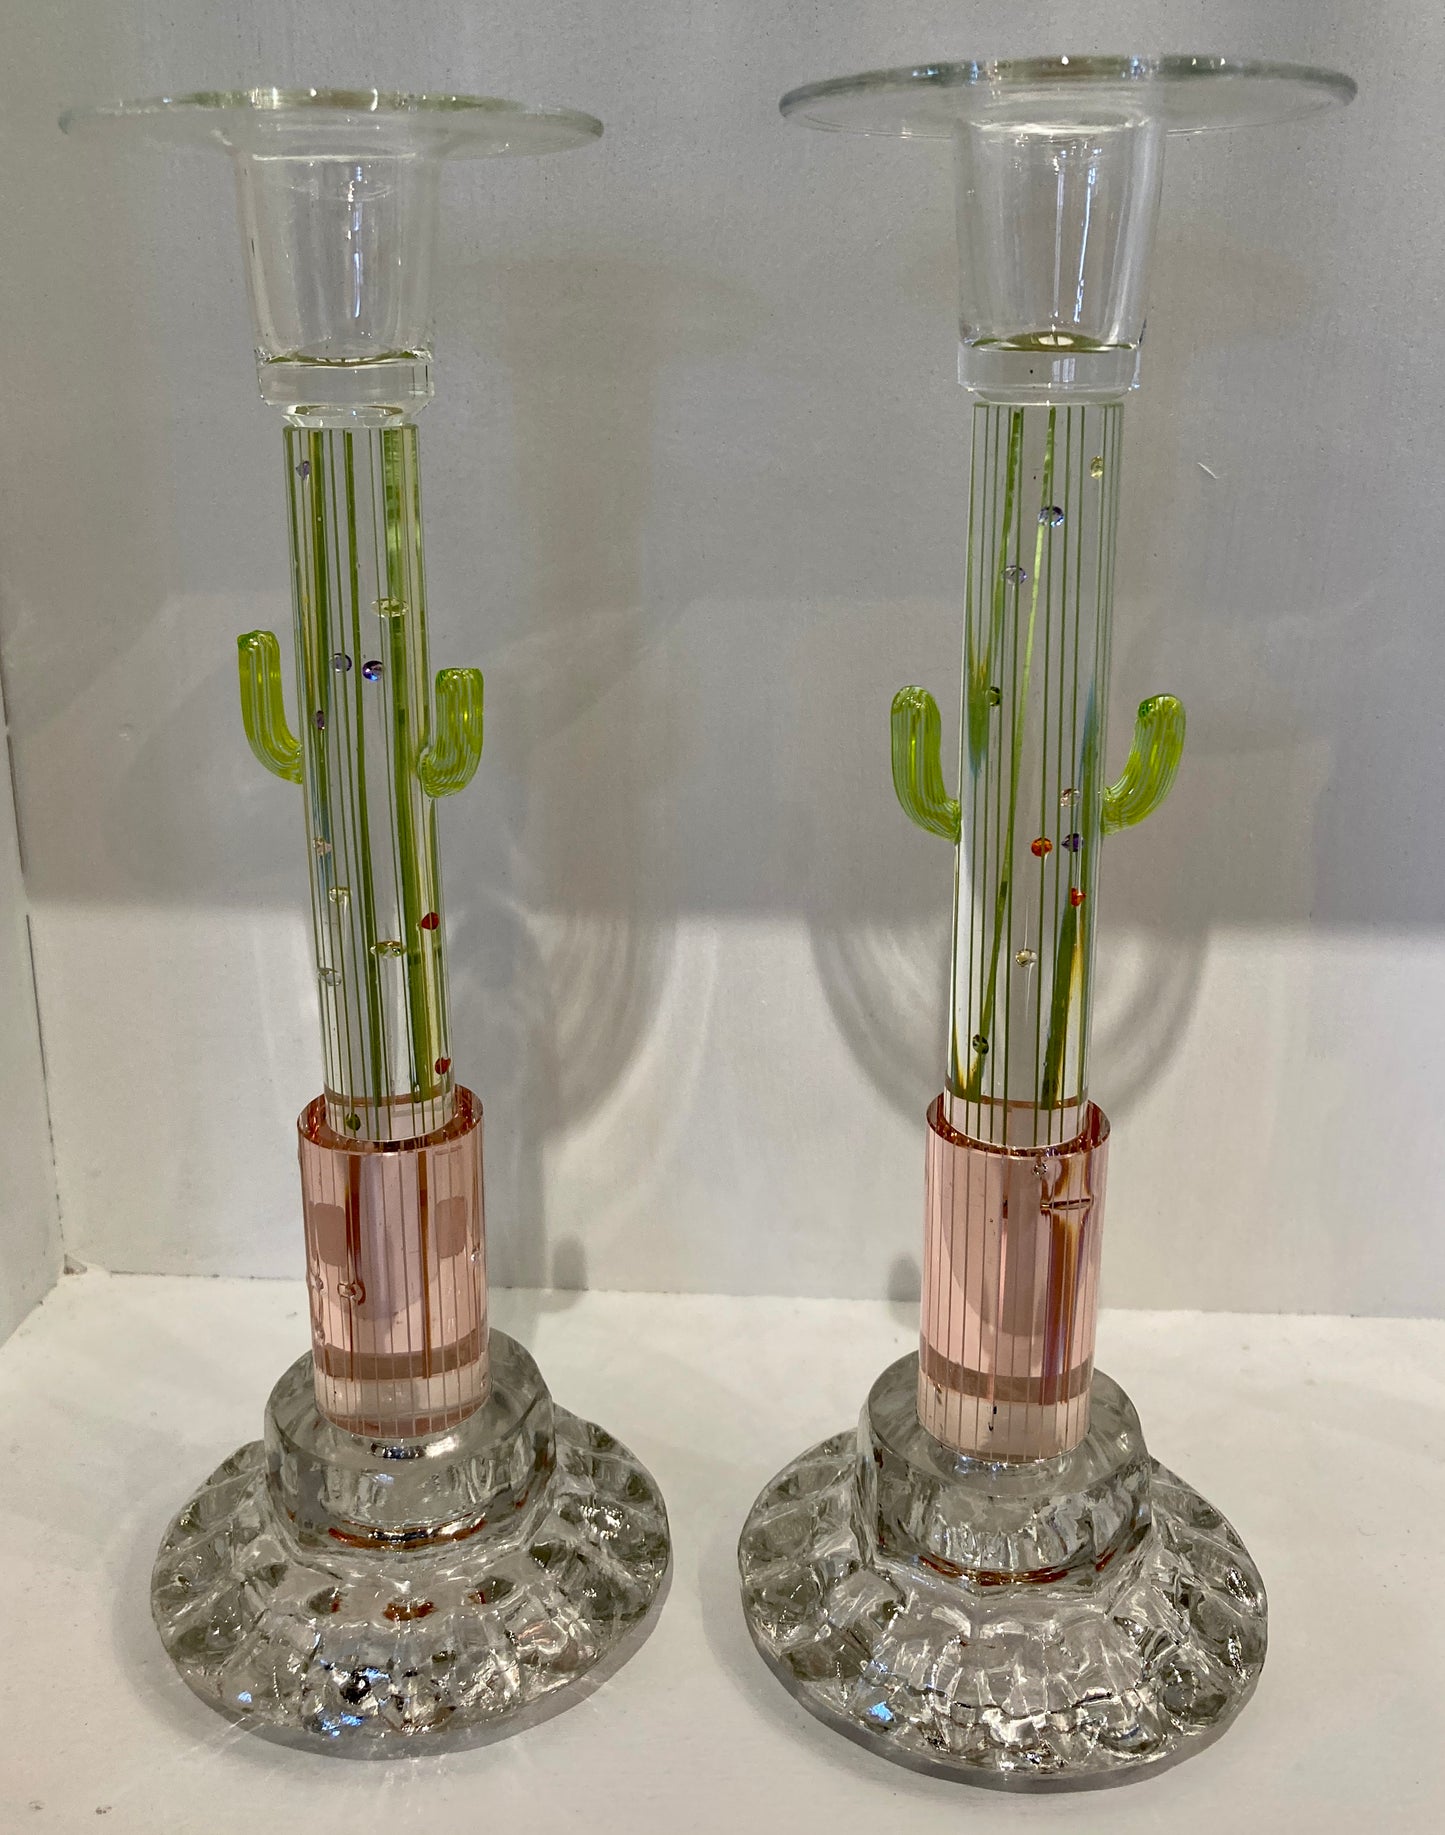 Cactus Candlestick Holders